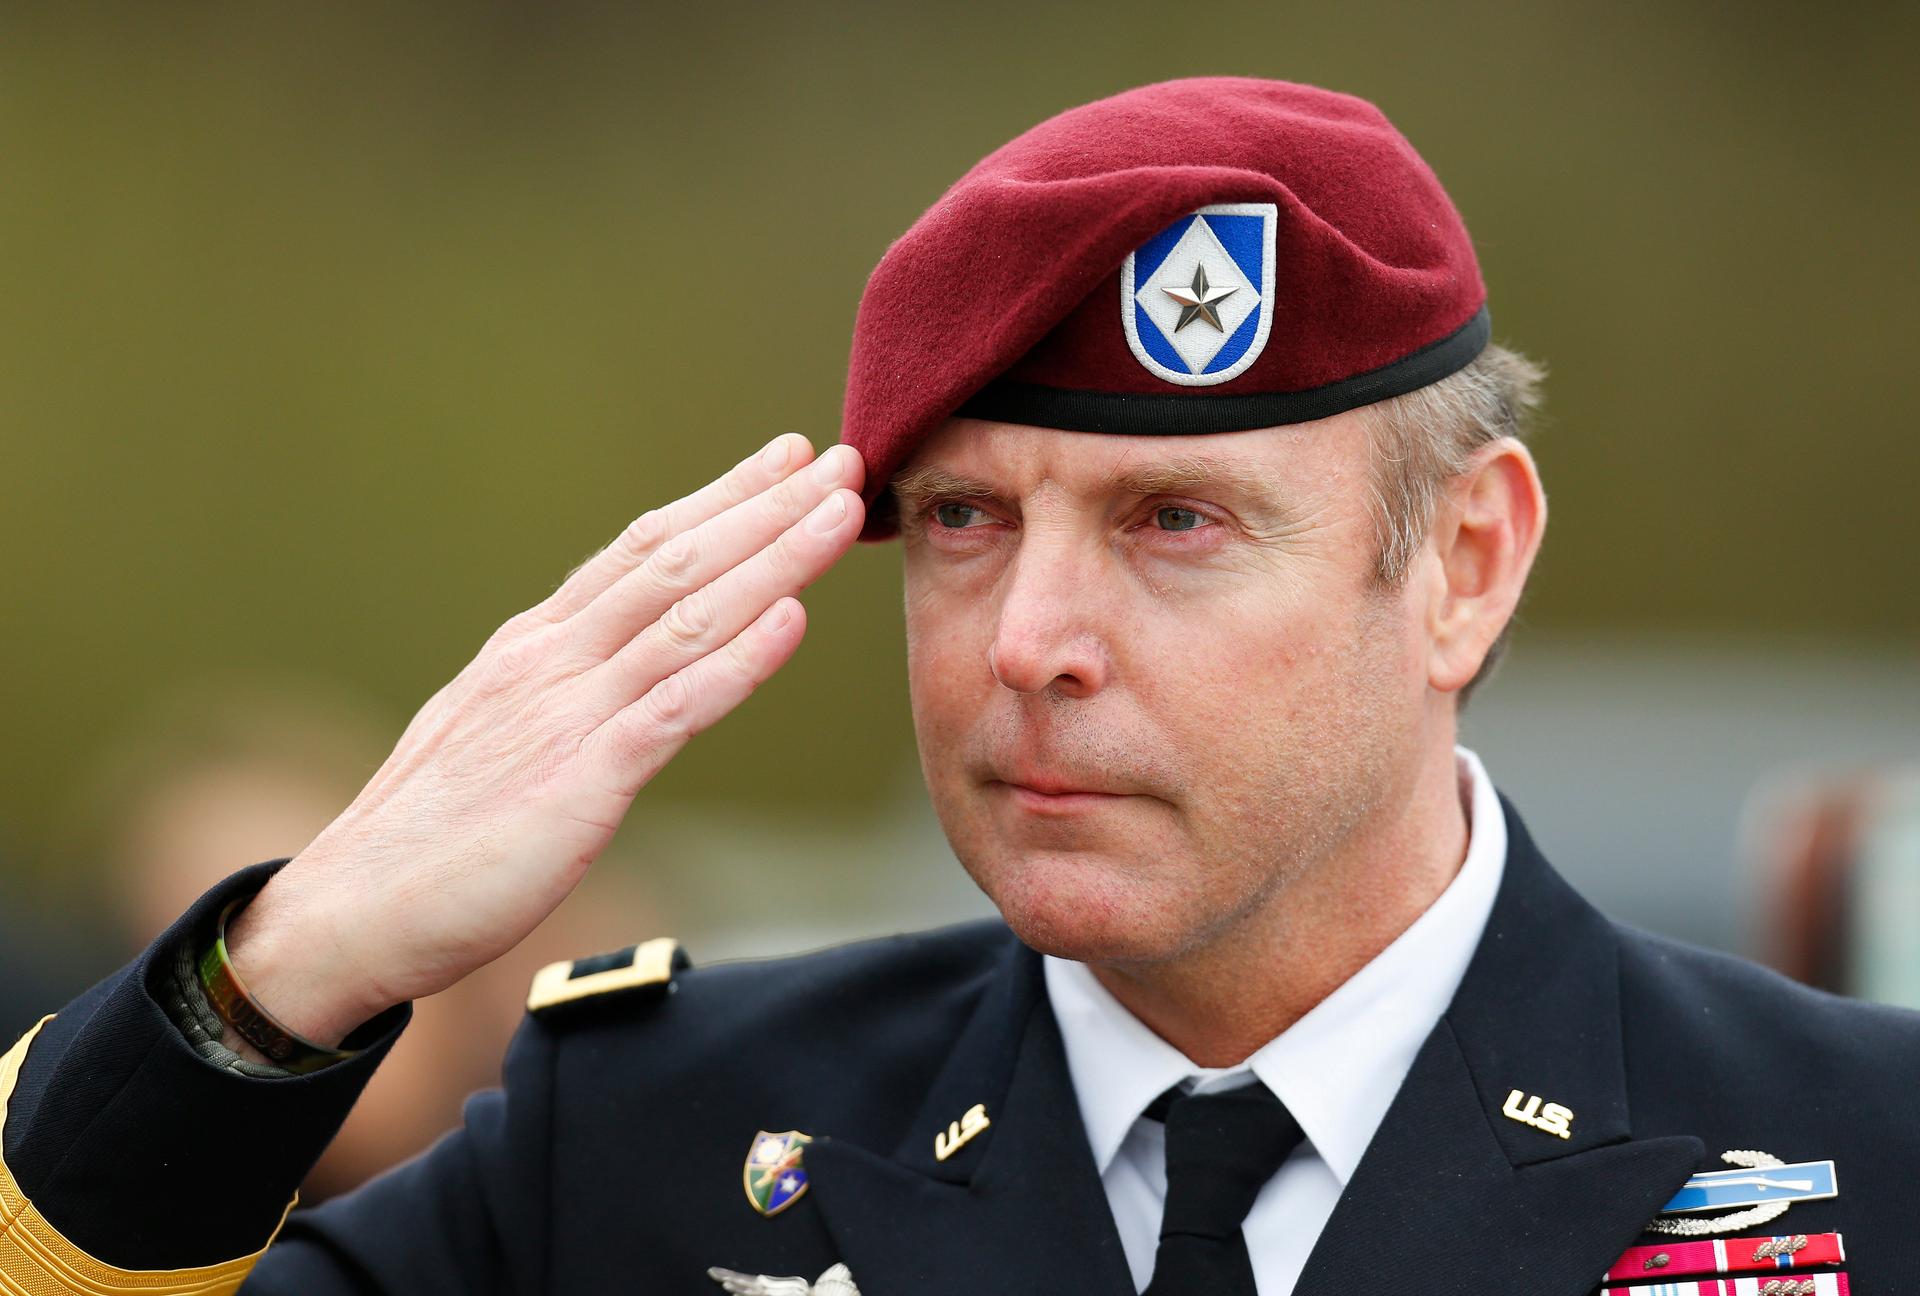 U.S. Army Brigadier General Jeffrey Sinclair salutes outside a North Carolina courthouse where he stood accused of bullying a junior officer into sex and threatening her life.